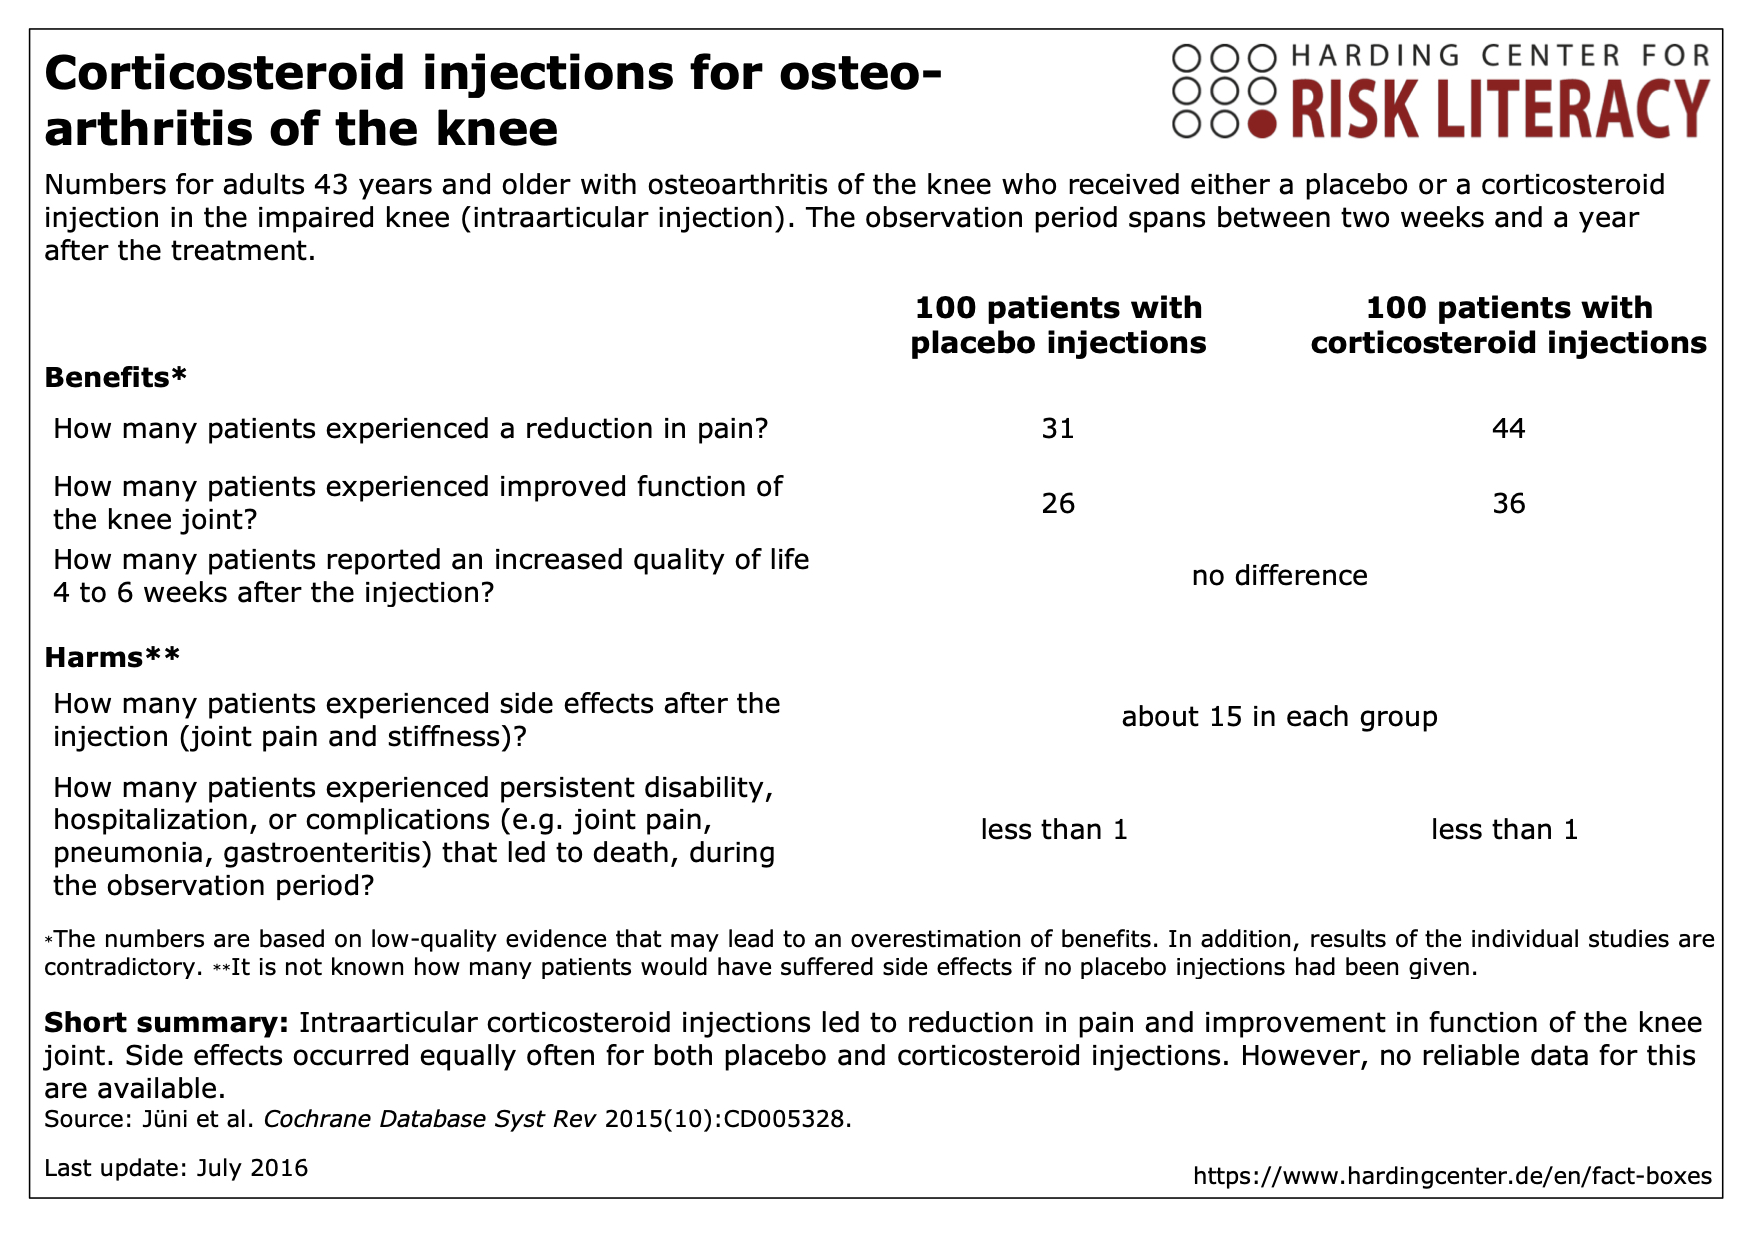 Fact box corticosteroid injections for osteoarthritis of the knee